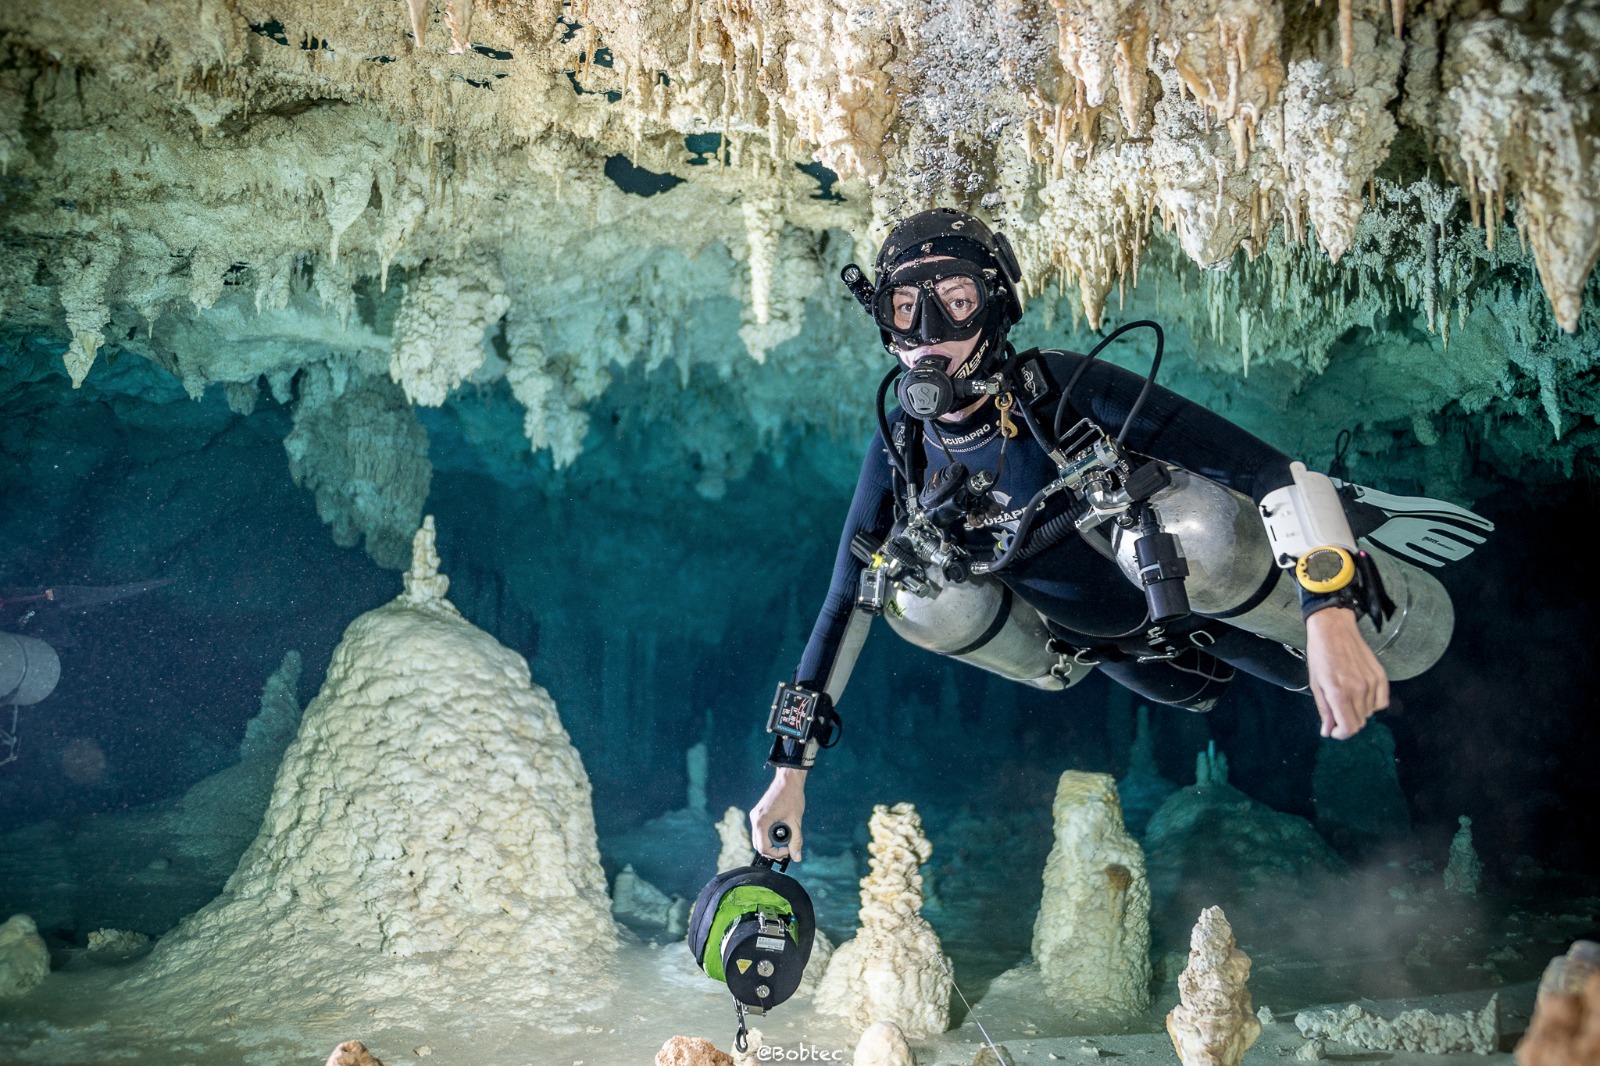 A beautiful cave dive in the biggest cave system on earth. A lifetime of diving awaits for you. Contact us for cave diving training or guided cave dives
info@DeepDarkDiving.com